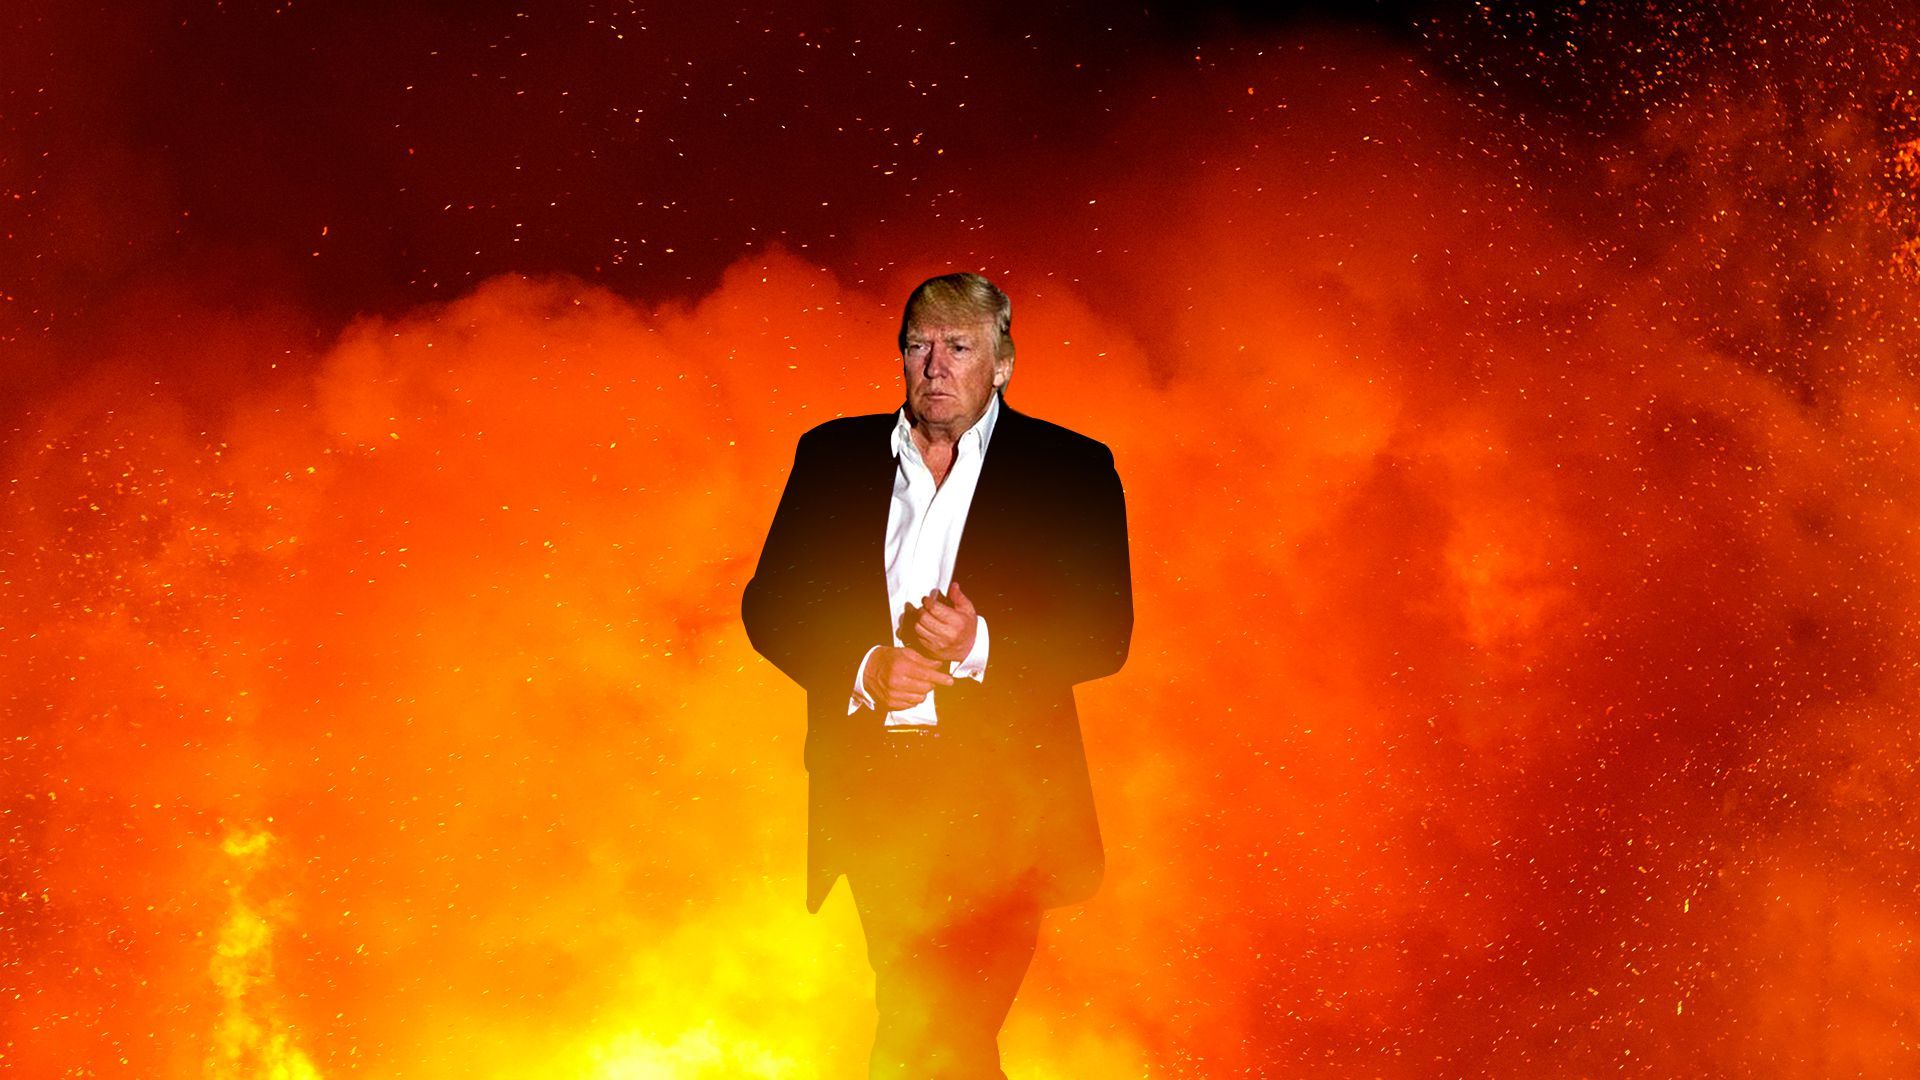 Trump emerging out of fire